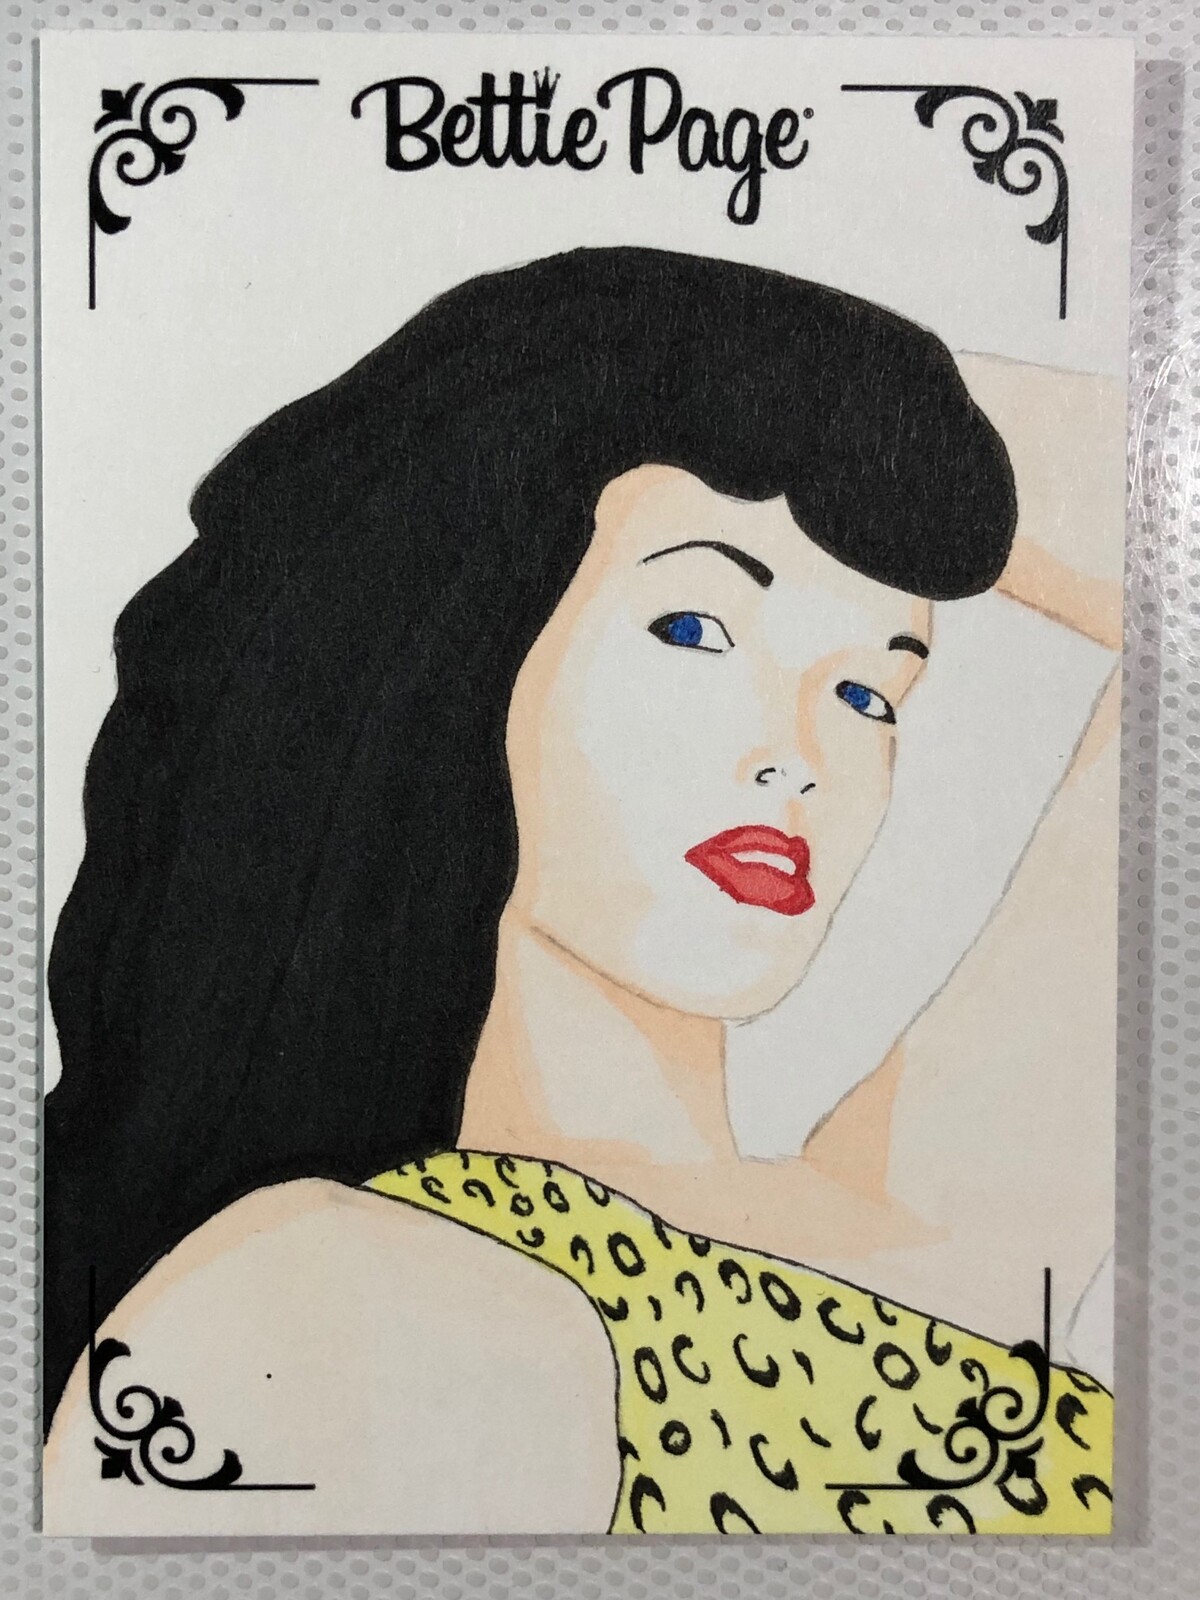 Bettie Page Art cards created for Dynamite Entertainments officially licensed Bettie Page trading card set